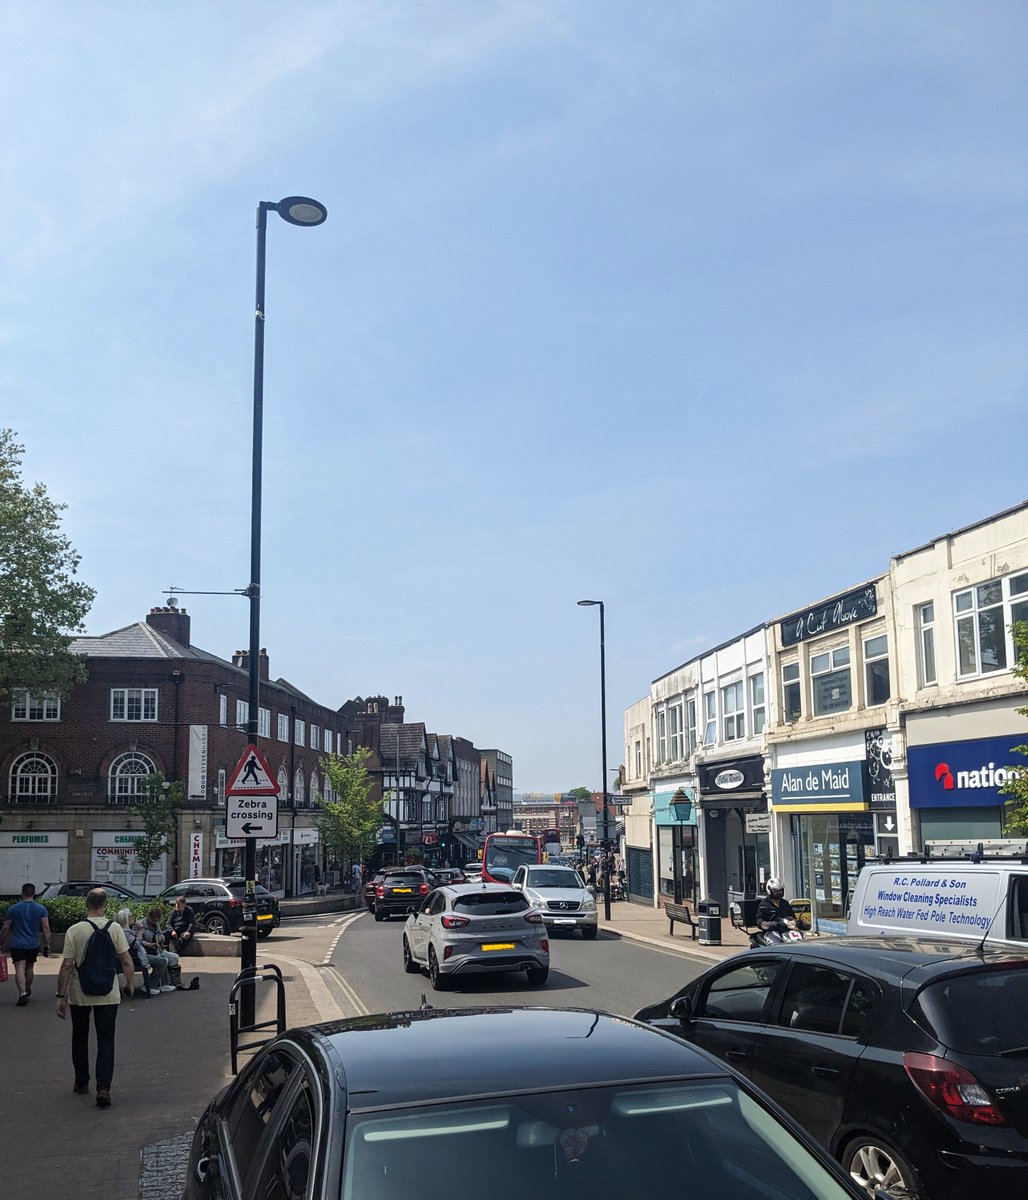 Such a shame that #Beckenham High Street so often resembles a large carpark, with on-street parking and gridlocked, polluting traffic slowing down buses (much of it not even visiting the high street stores).  It doesn't have to be this way! #streetsareforpeople